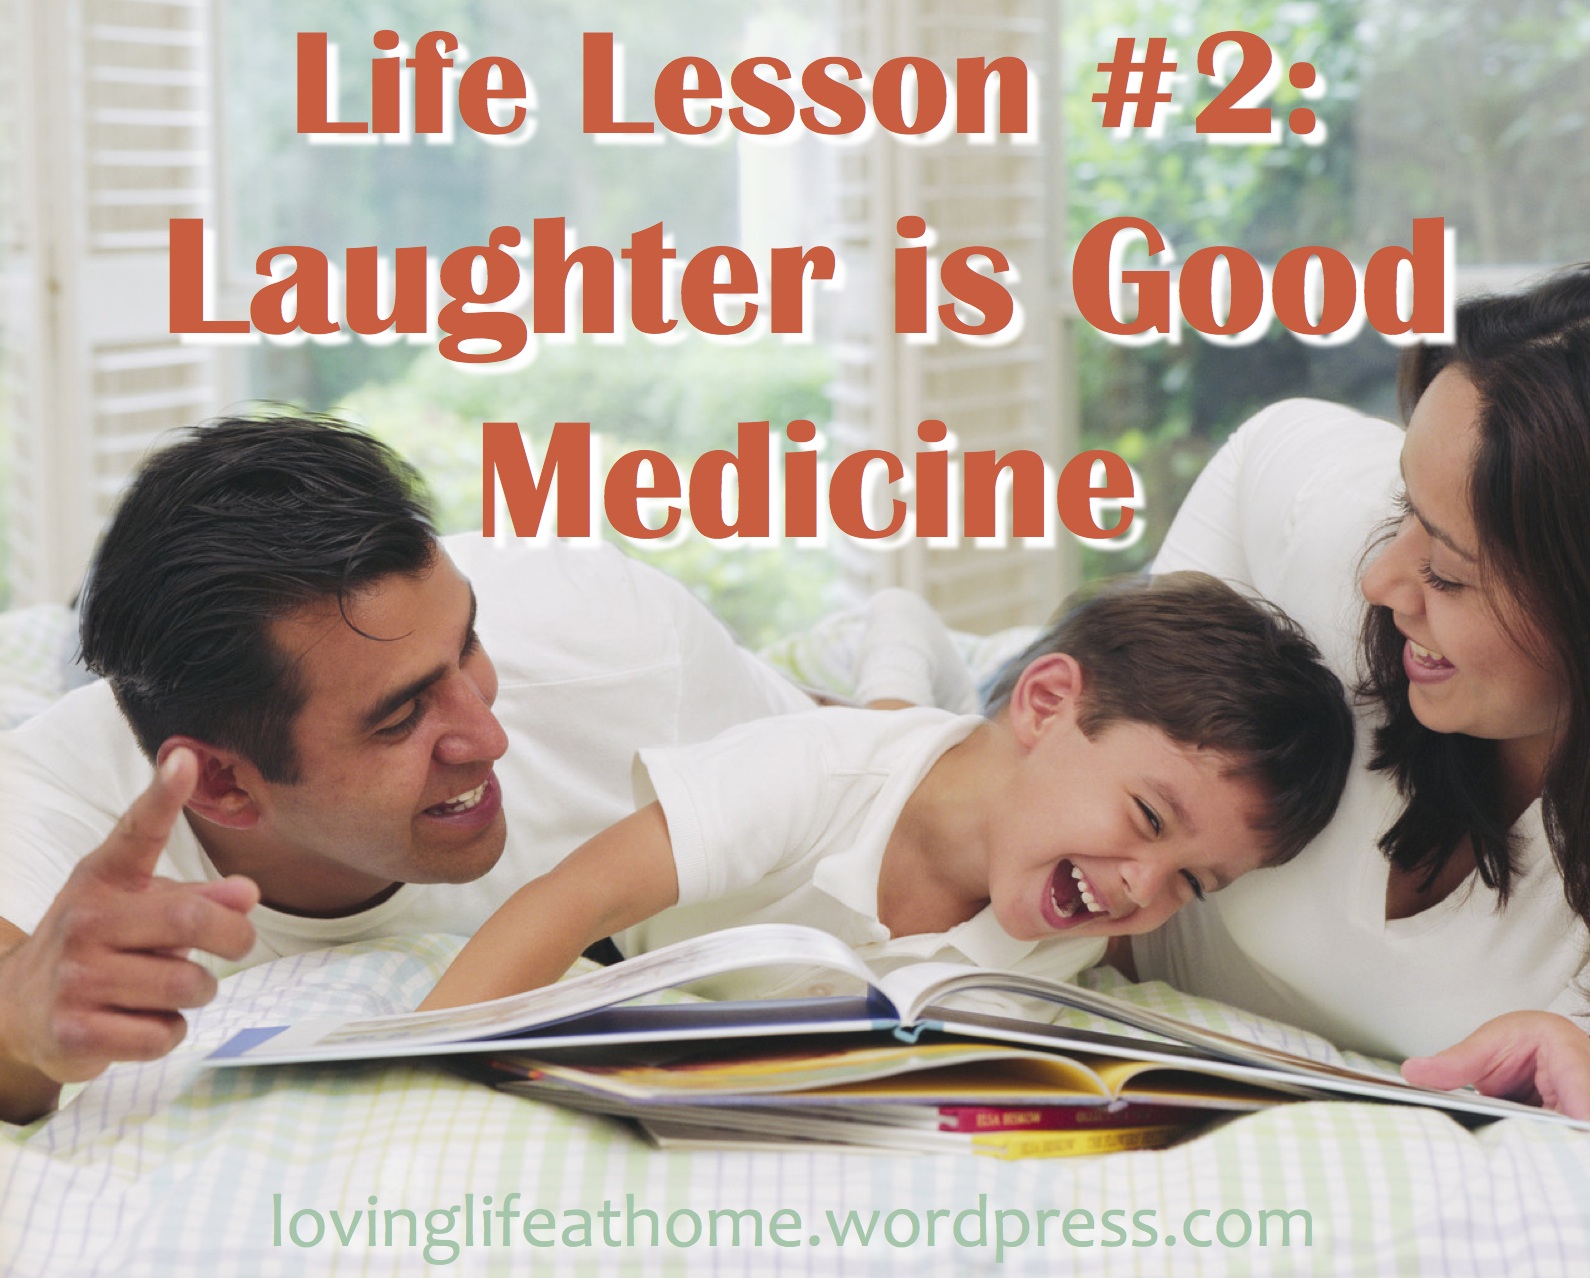 Laughter is Good Medicine